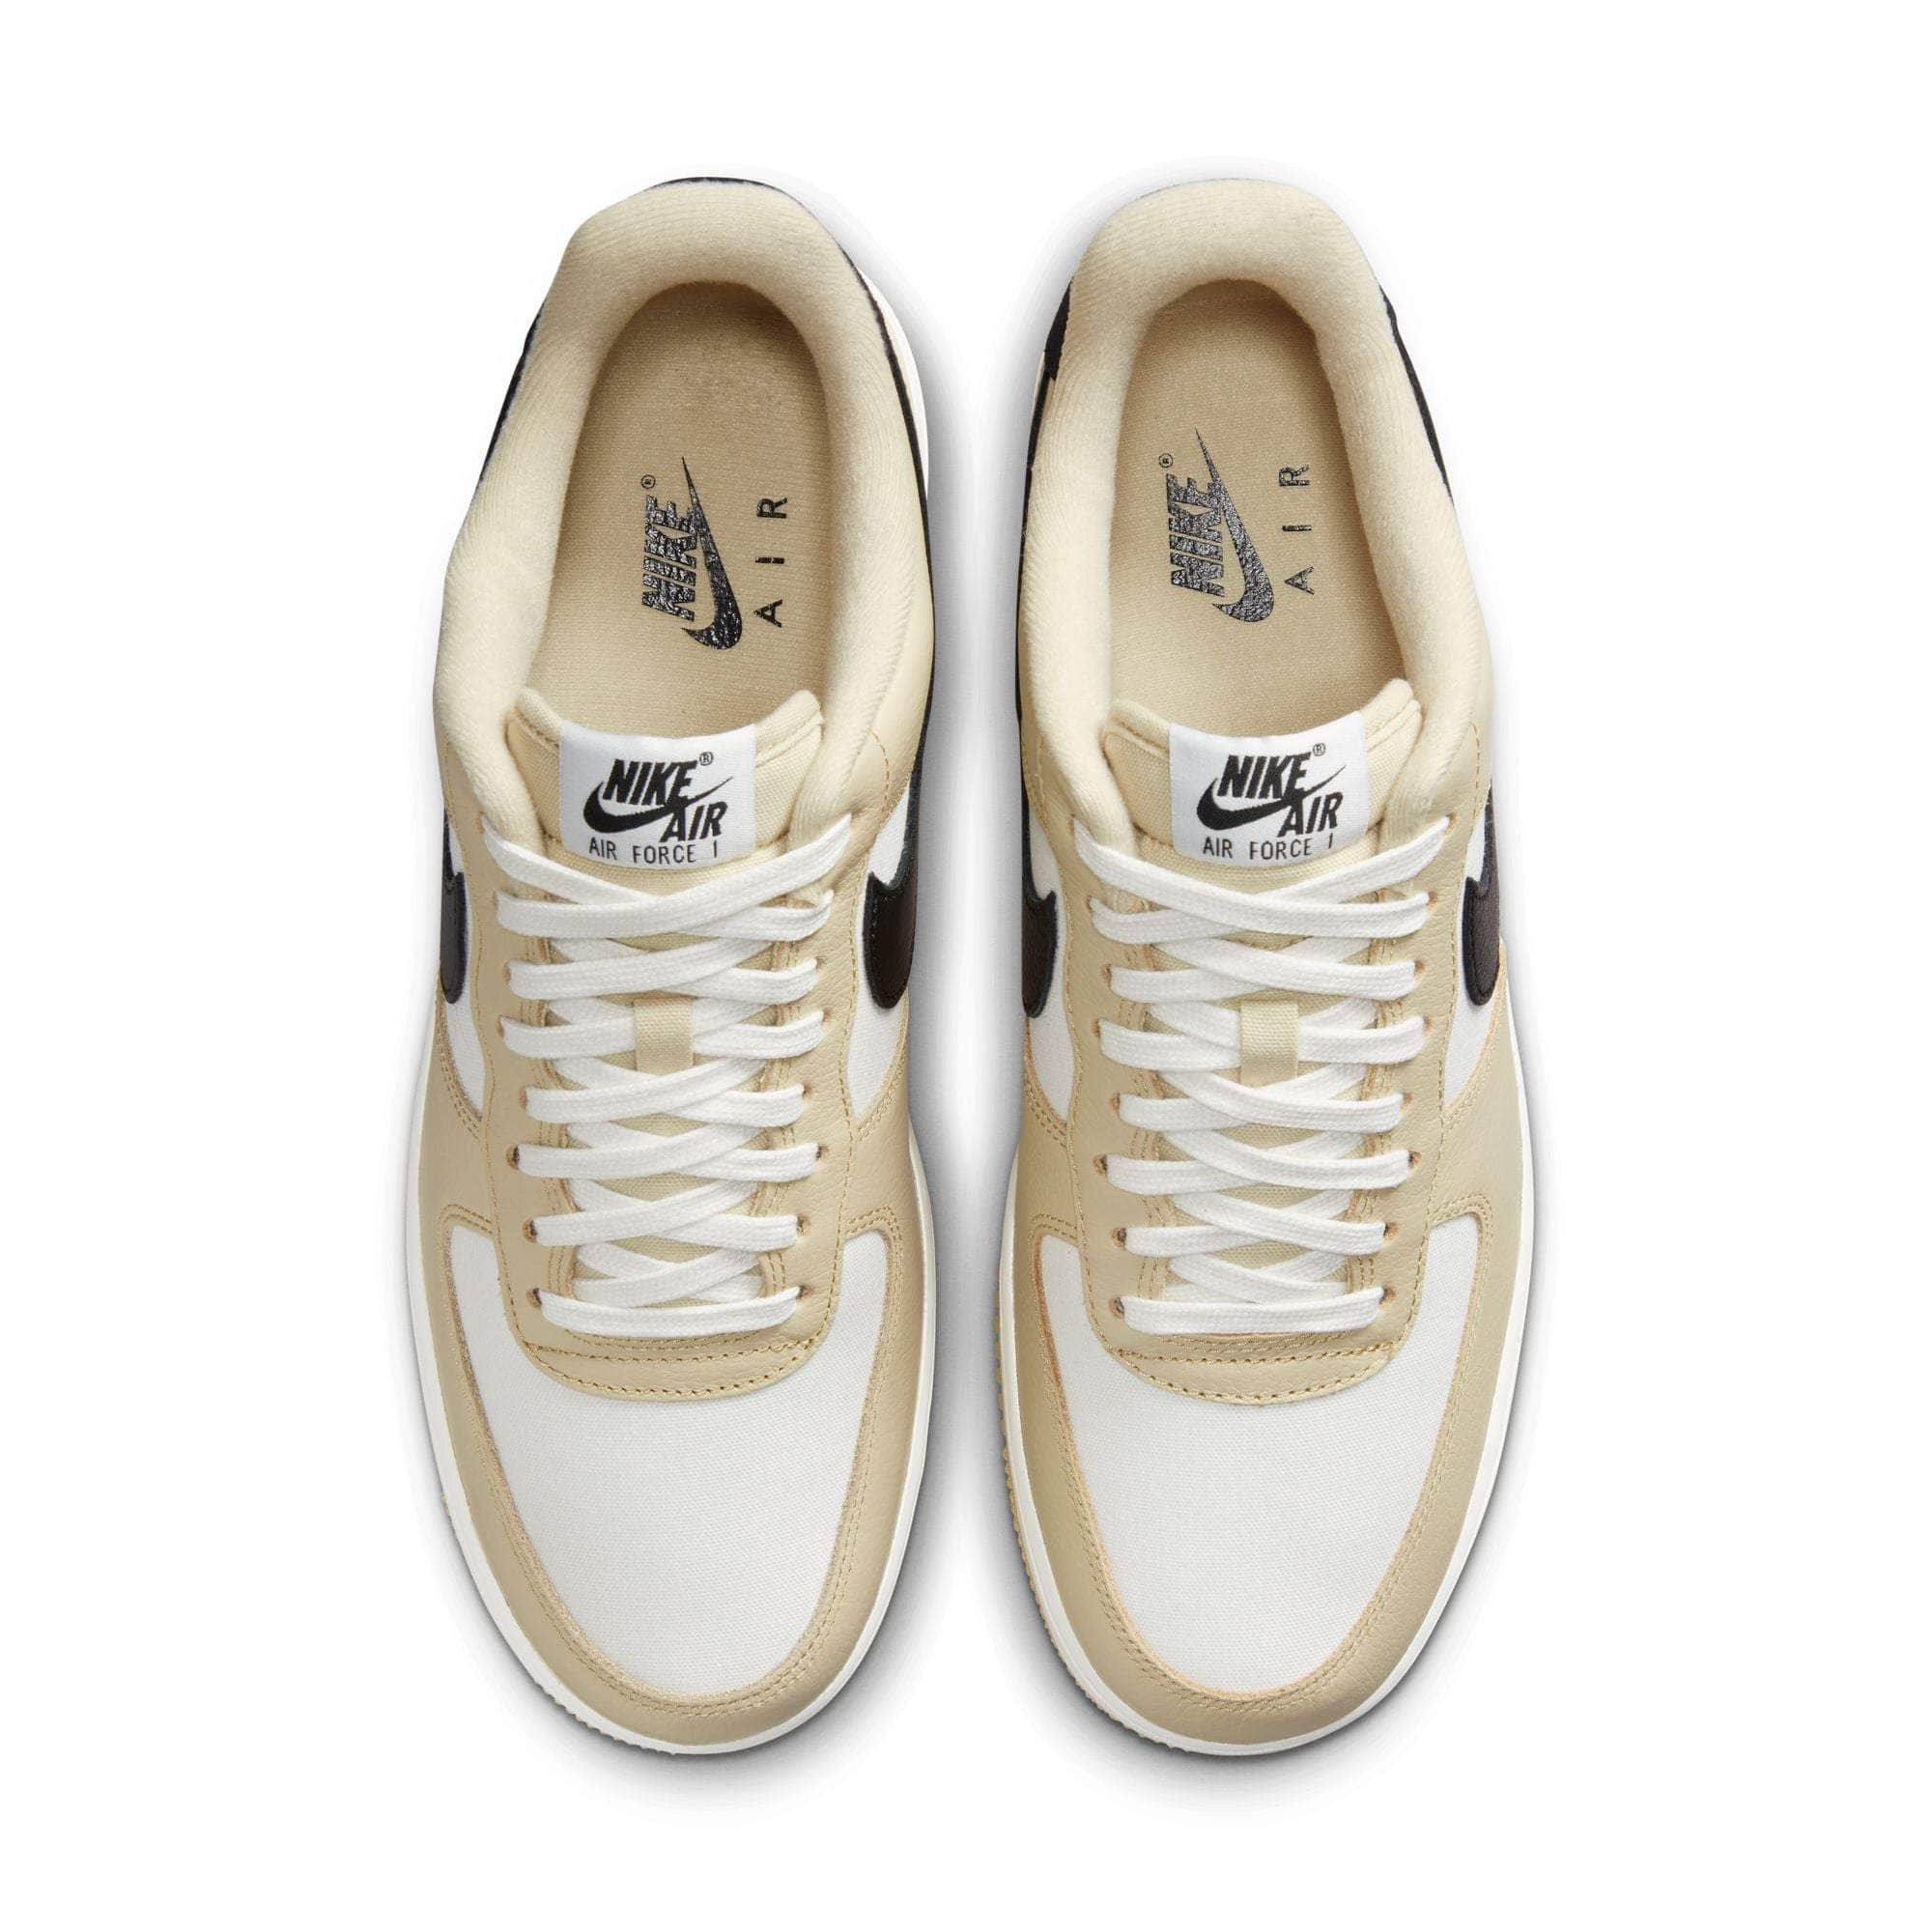 Nike Air Force 1 Low LX 'Team Gold' - Men's - GBNY